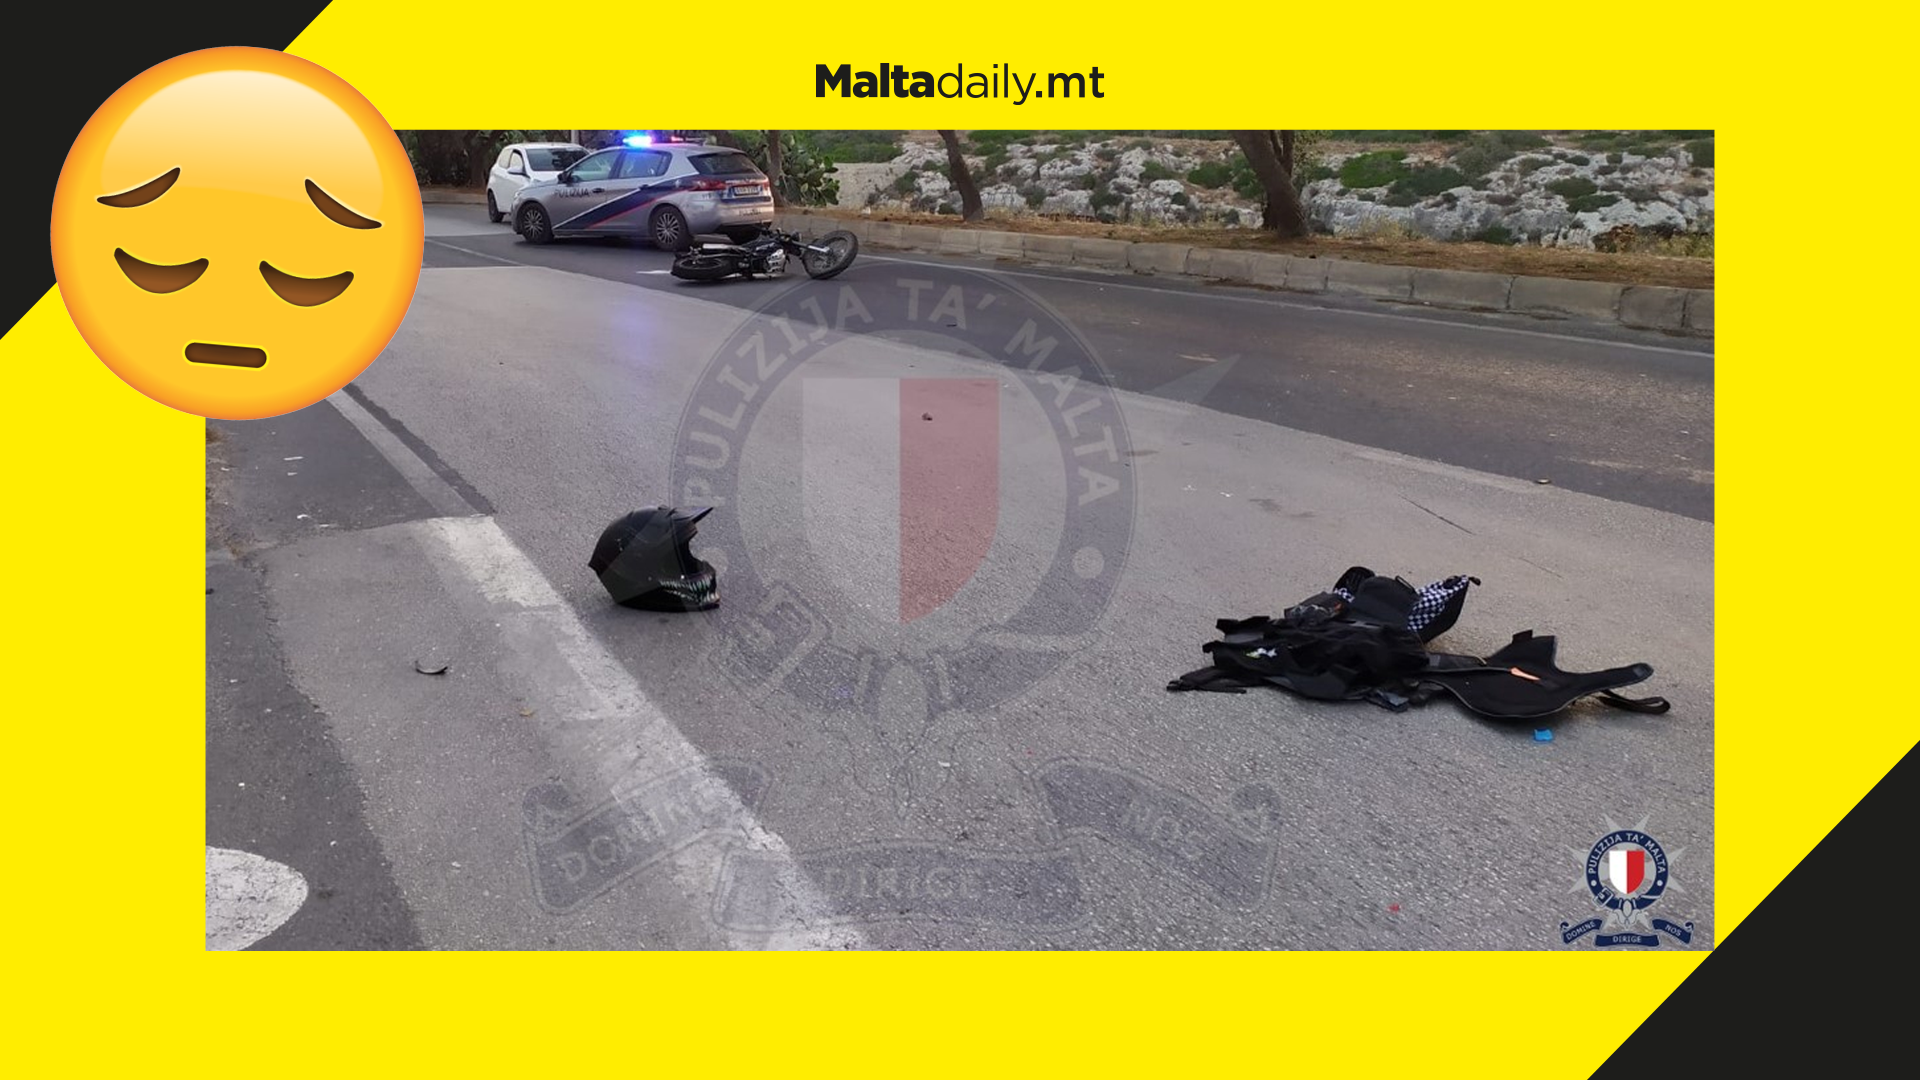 Motorcyclist grievously injured in Mosta traffic accident